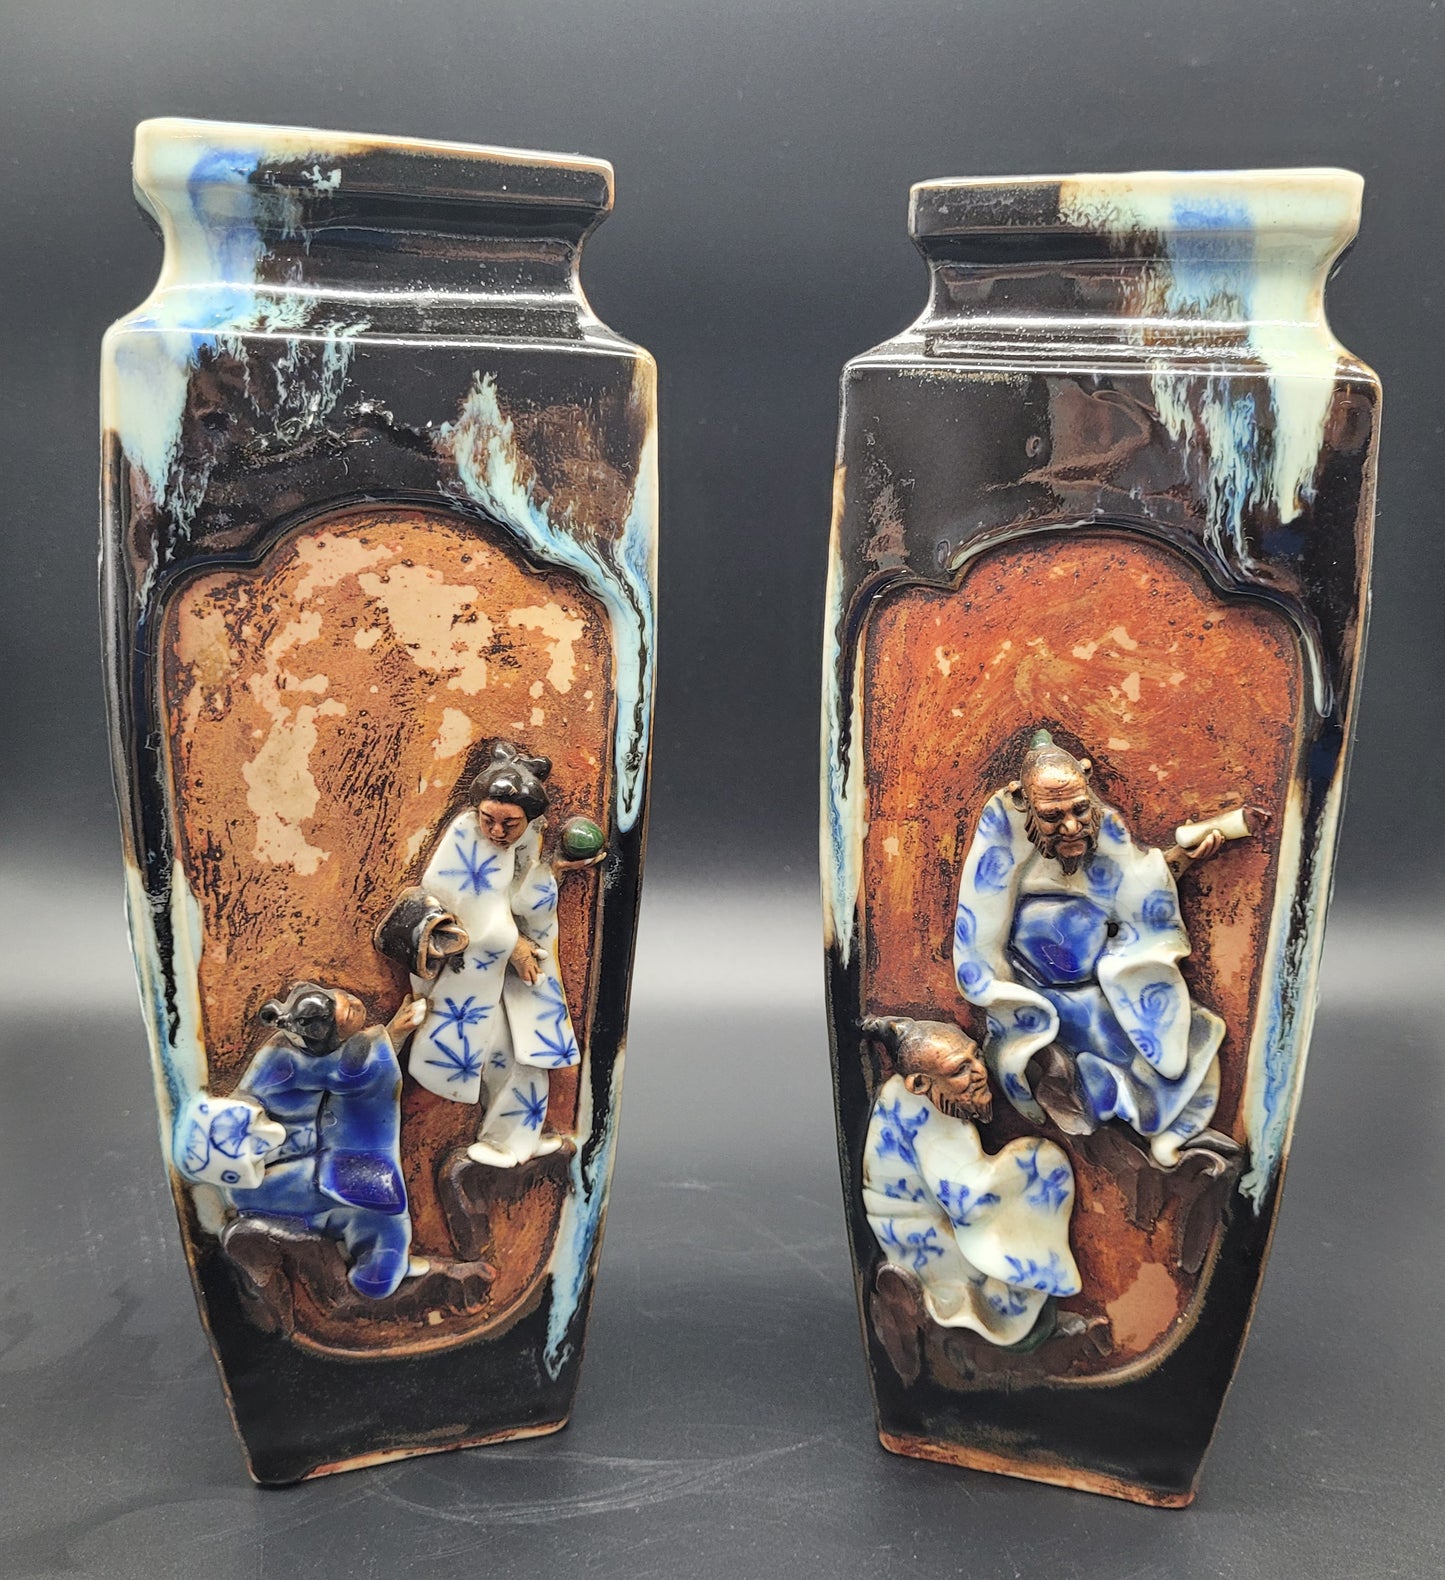 Highly Detailed Japanese Meiji Sumida Gawa Pottery Vases Signed By The Artist   Late 19th Century Meiji period 